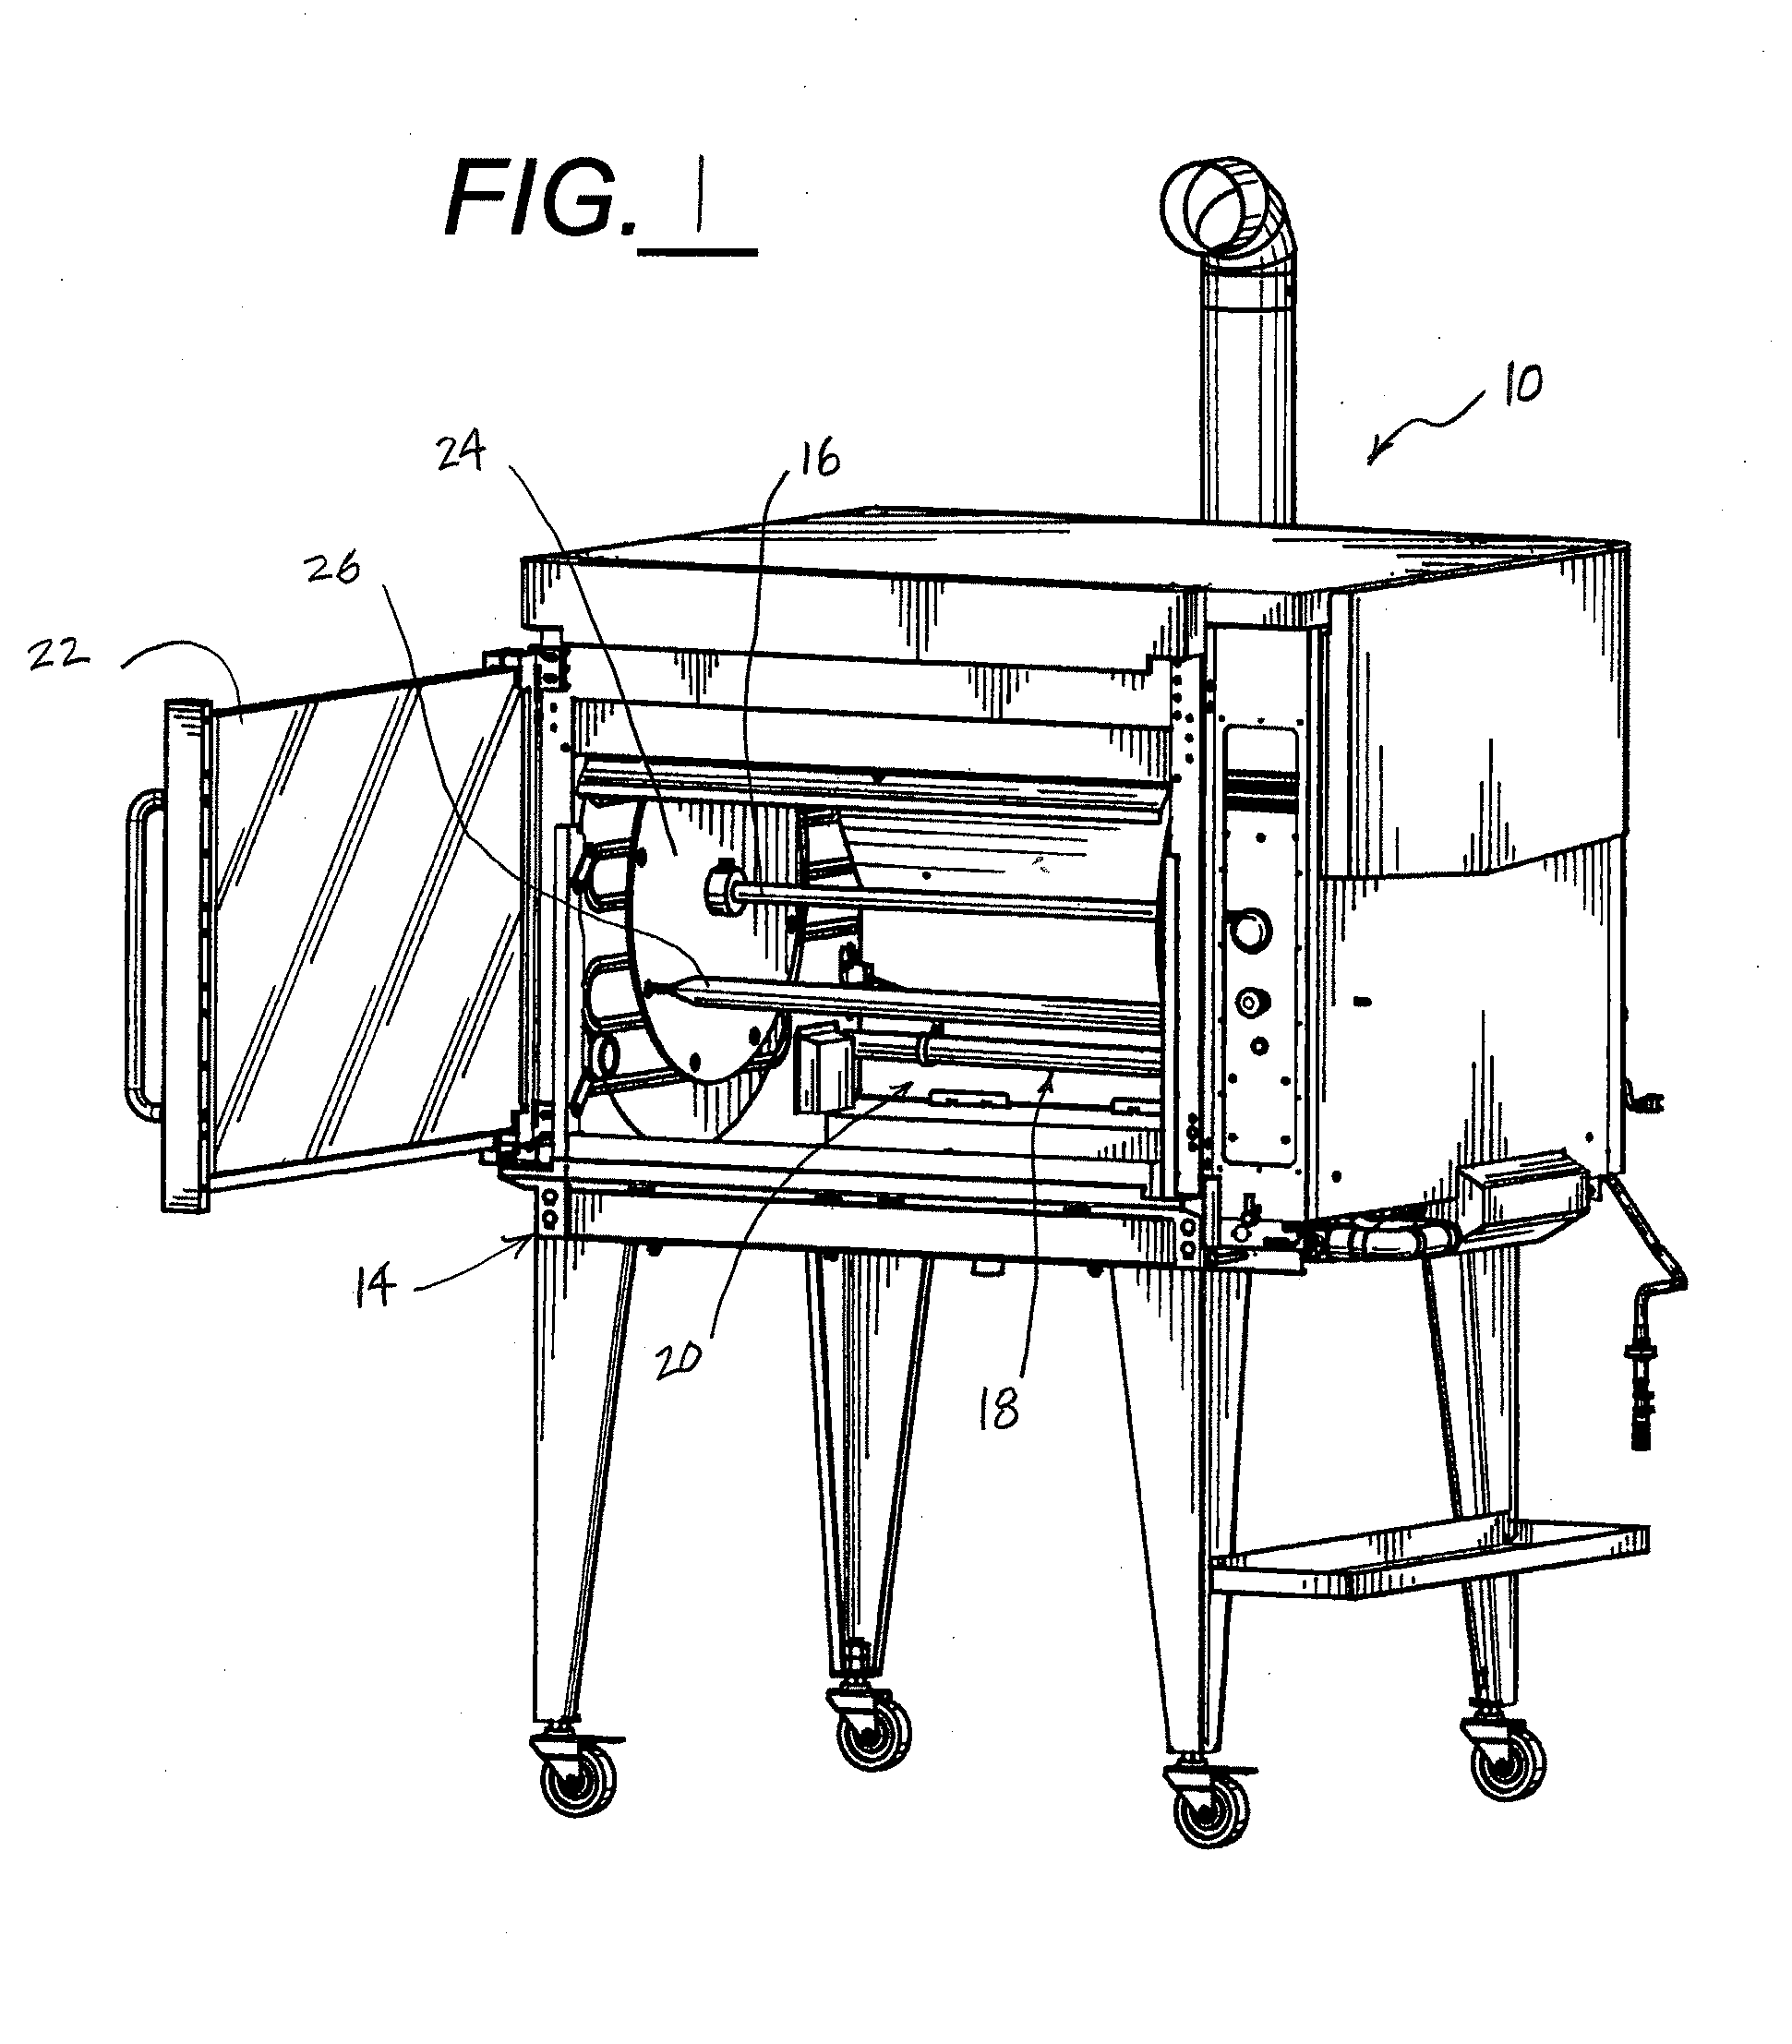 Ignition system for flame emitting apparatus